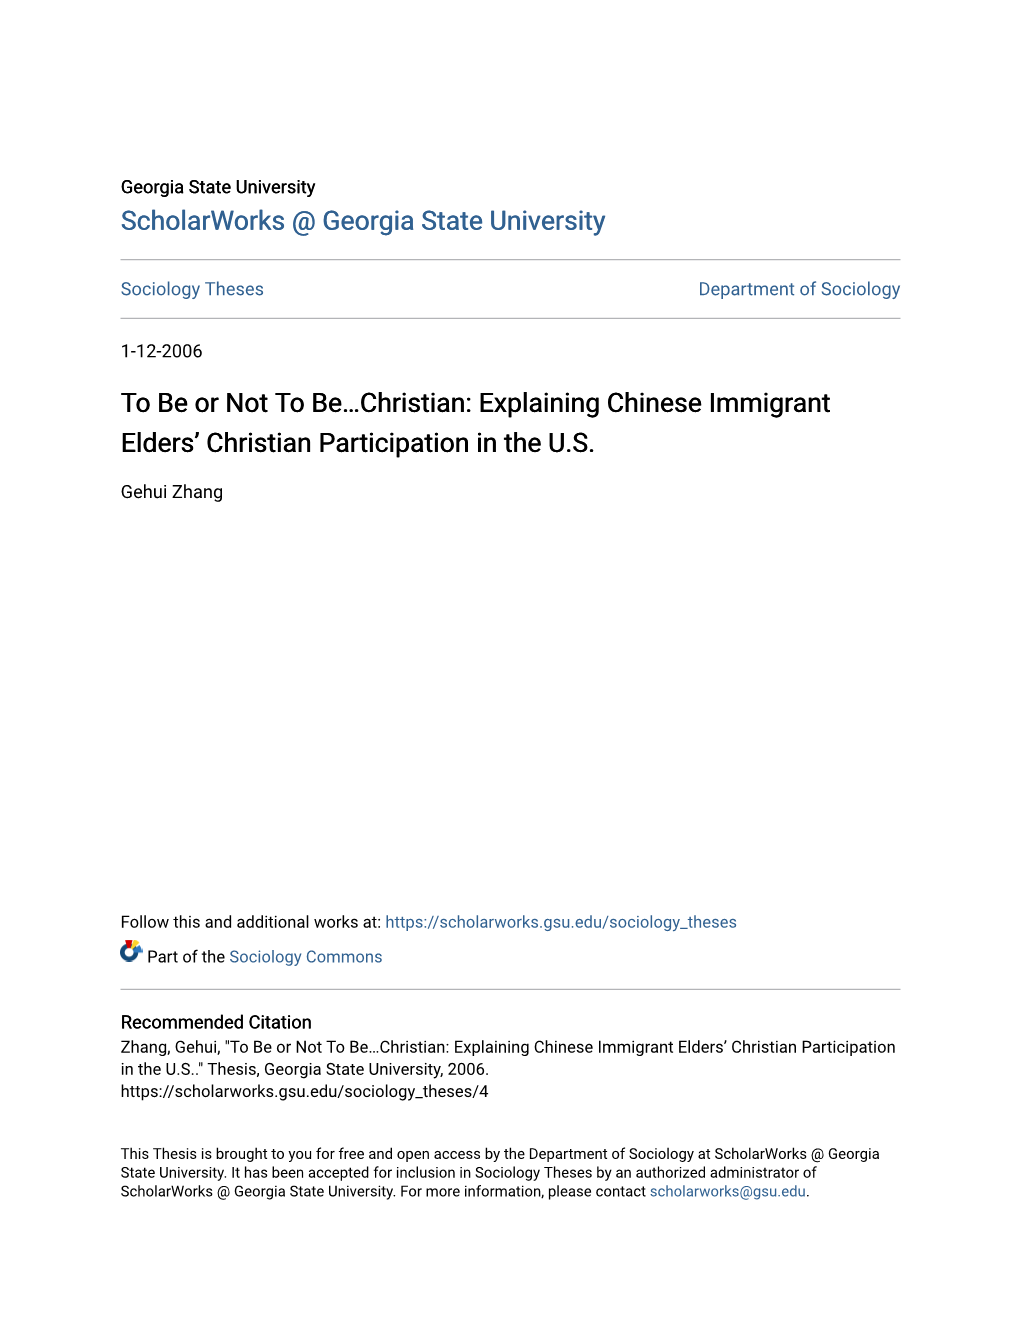 To Be Or Not to Be…Christian: Explaining Chinese Immigrant Elders’ Christian Participation in the U.S